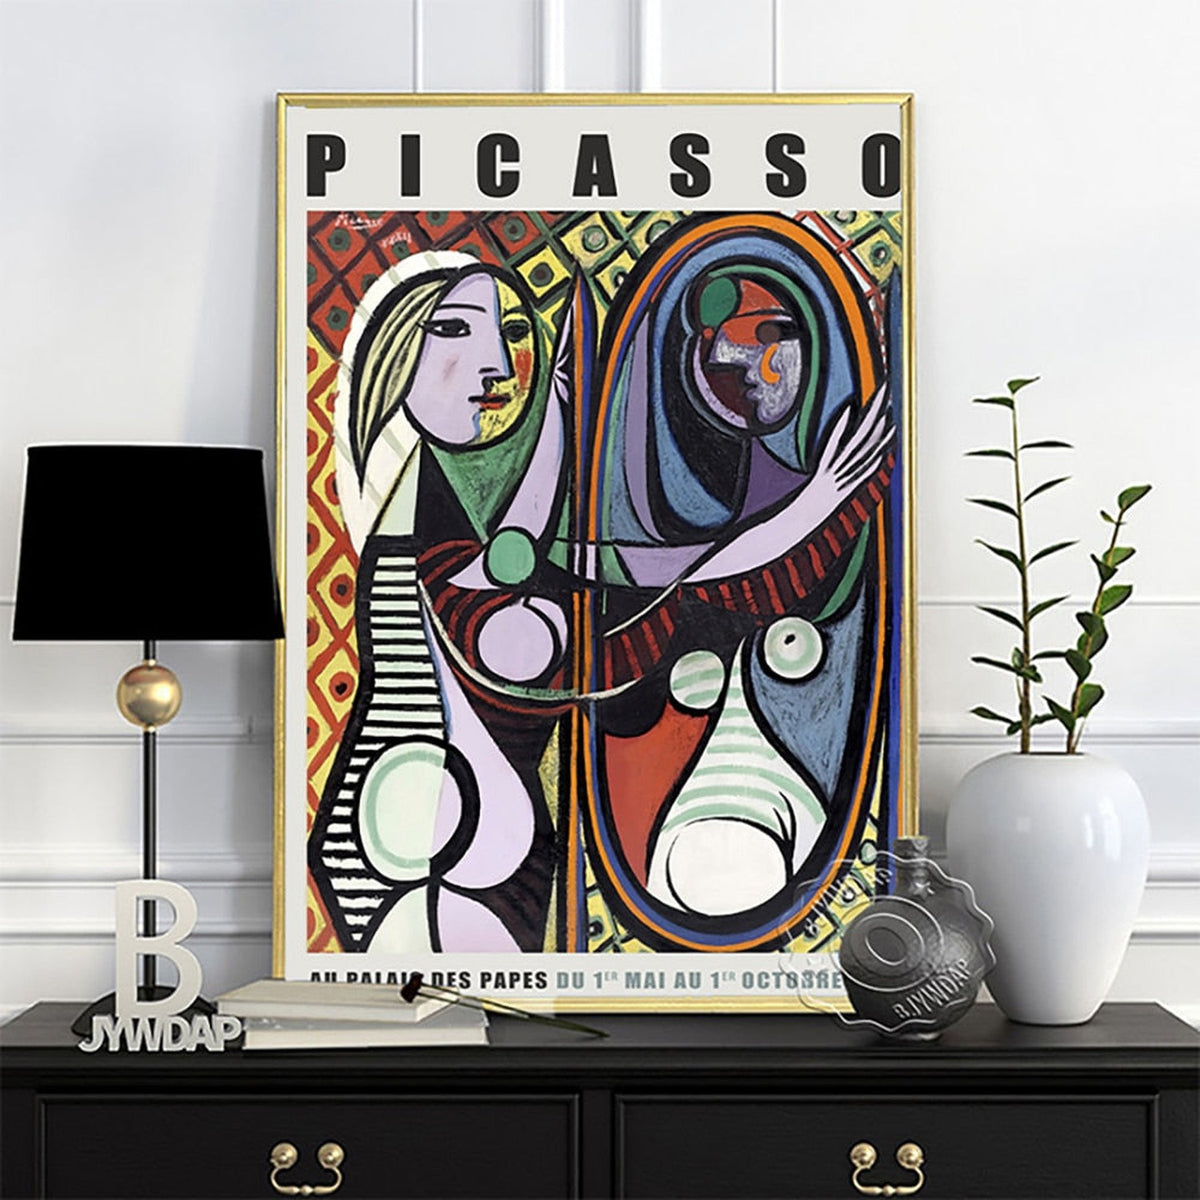 Original Pablo Picasso Exhibition Poster Artworks from the Master Displayed-ChandeliersDecor